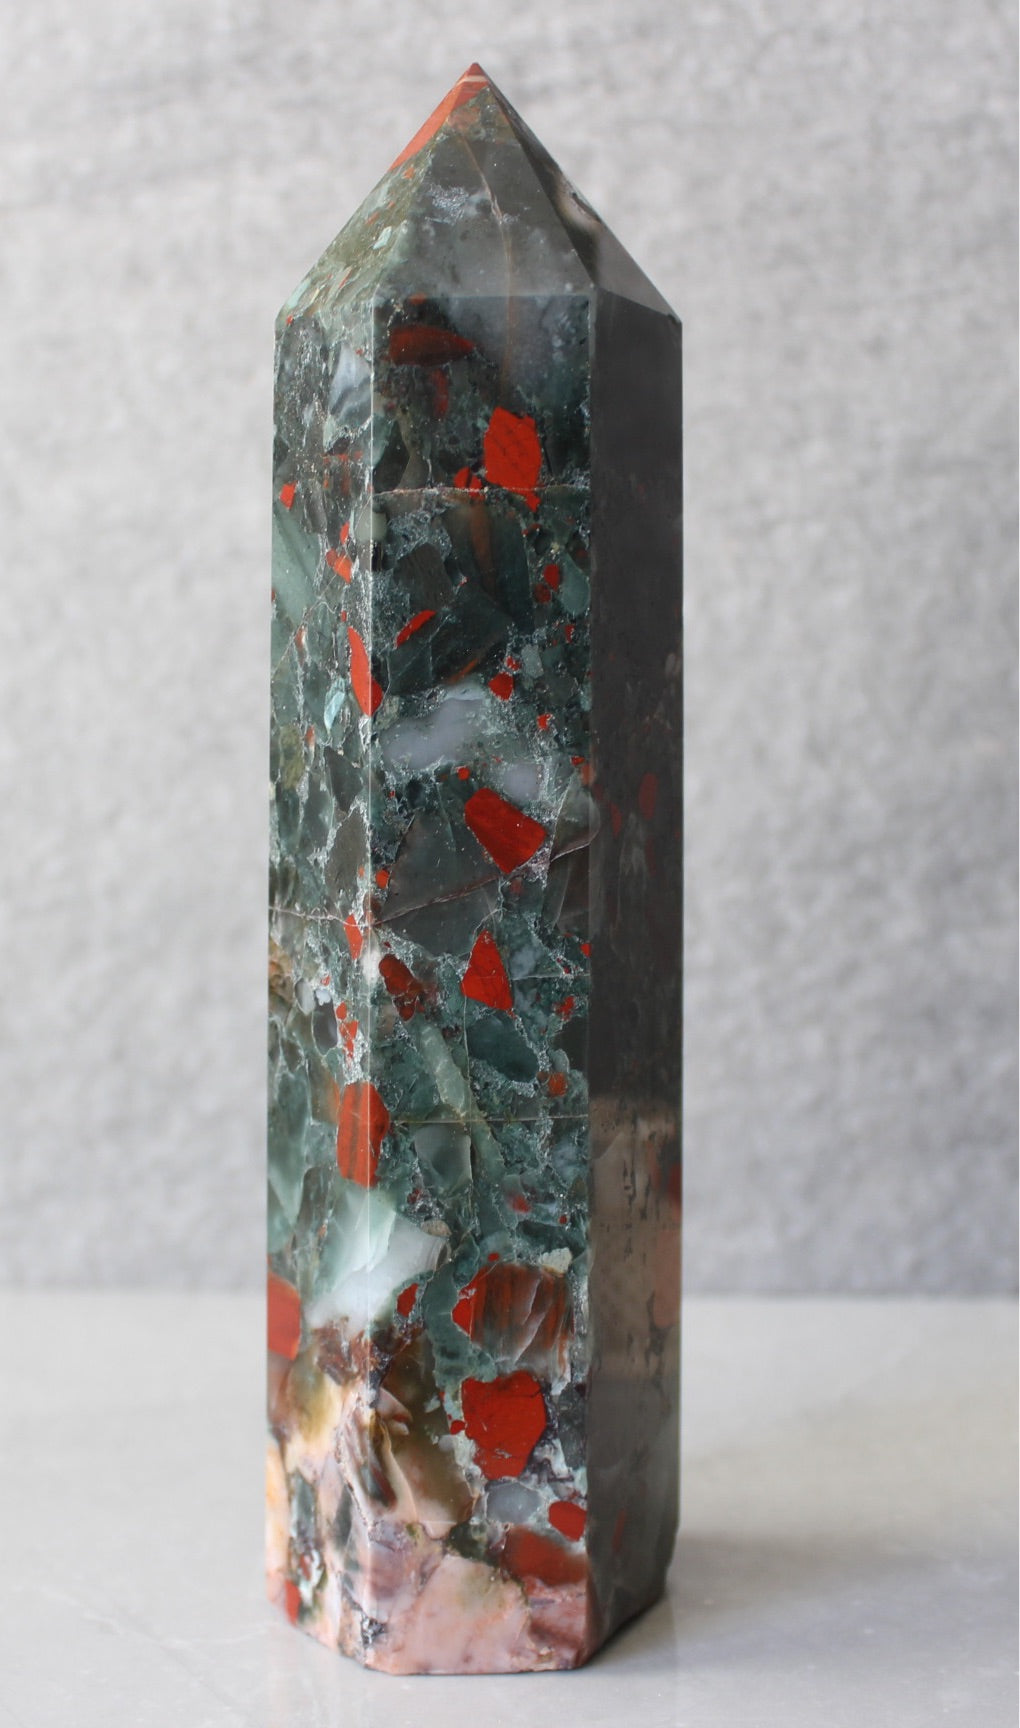 Large African Bloodstone Tower | African Bloodstone Point Tons of Soul